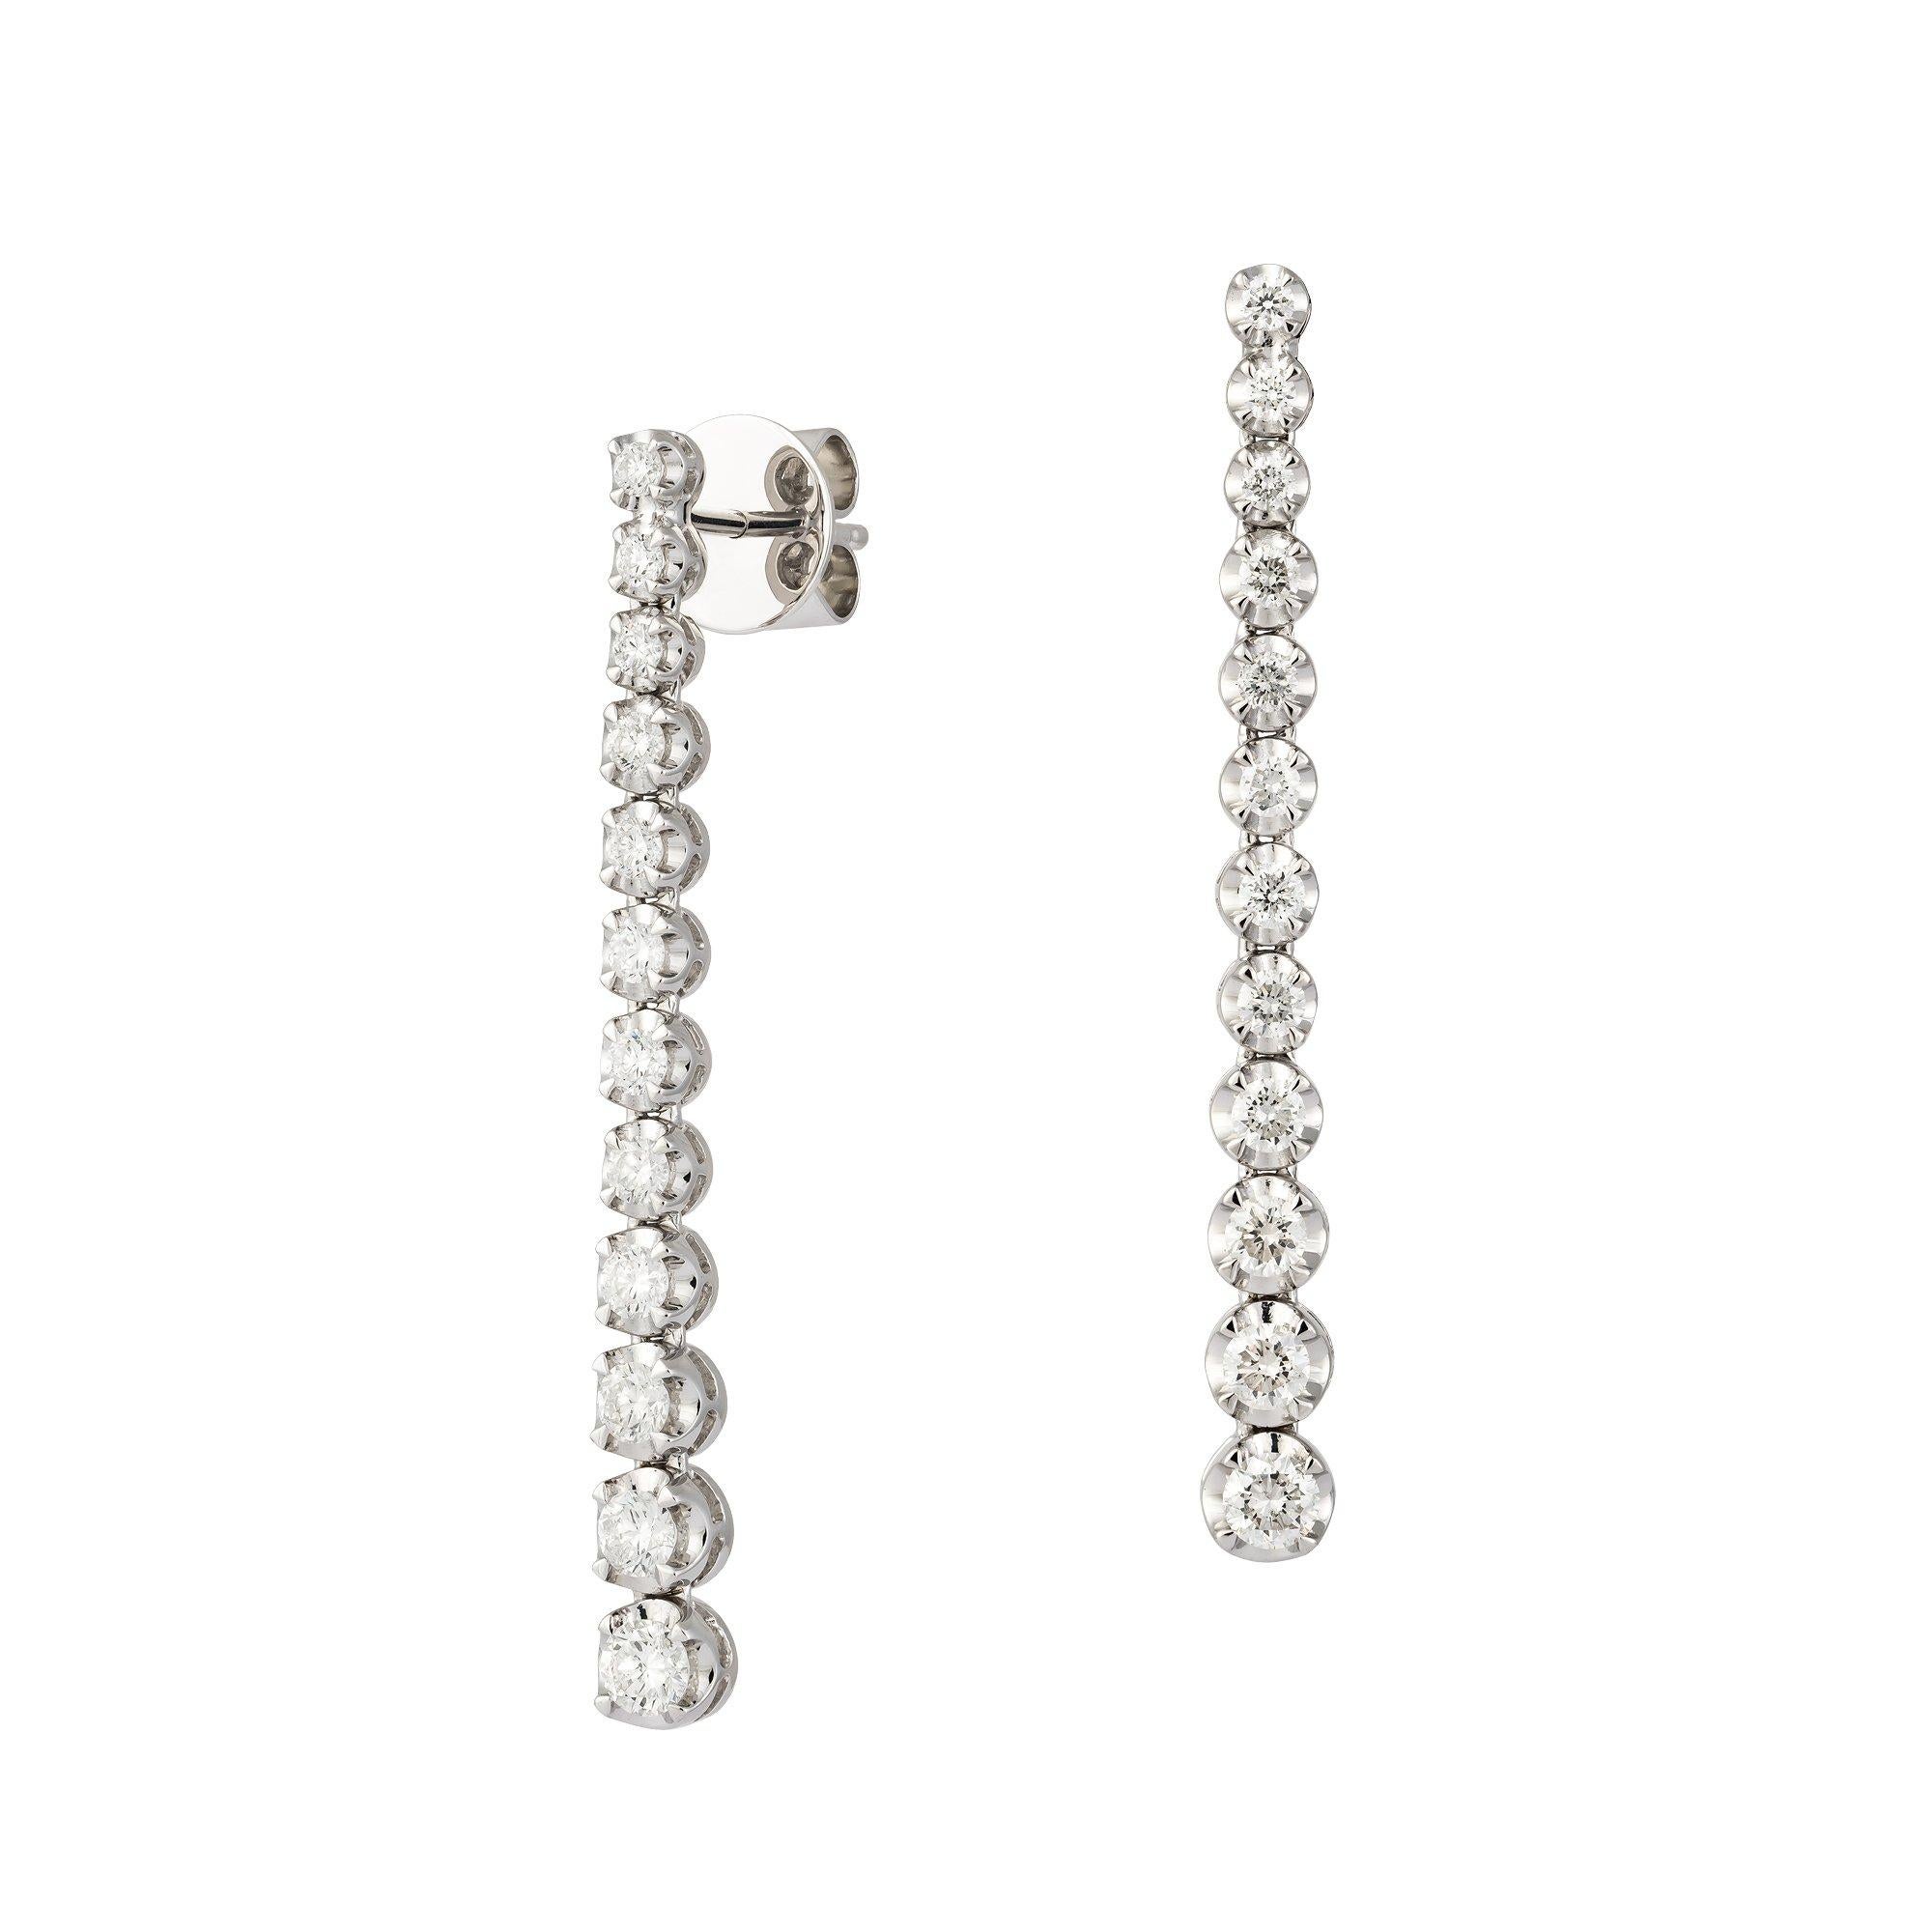 Graduation Diamond EARRING 18K White Gold 

Diamond 1.04 Cts/24 Pcs

With a heritage of ancient fine Swiss jewelry traditions, NATKINA is a Geneva based jewellery brand, which creates modern jewellery masterpieces suitable for every day life.
It is